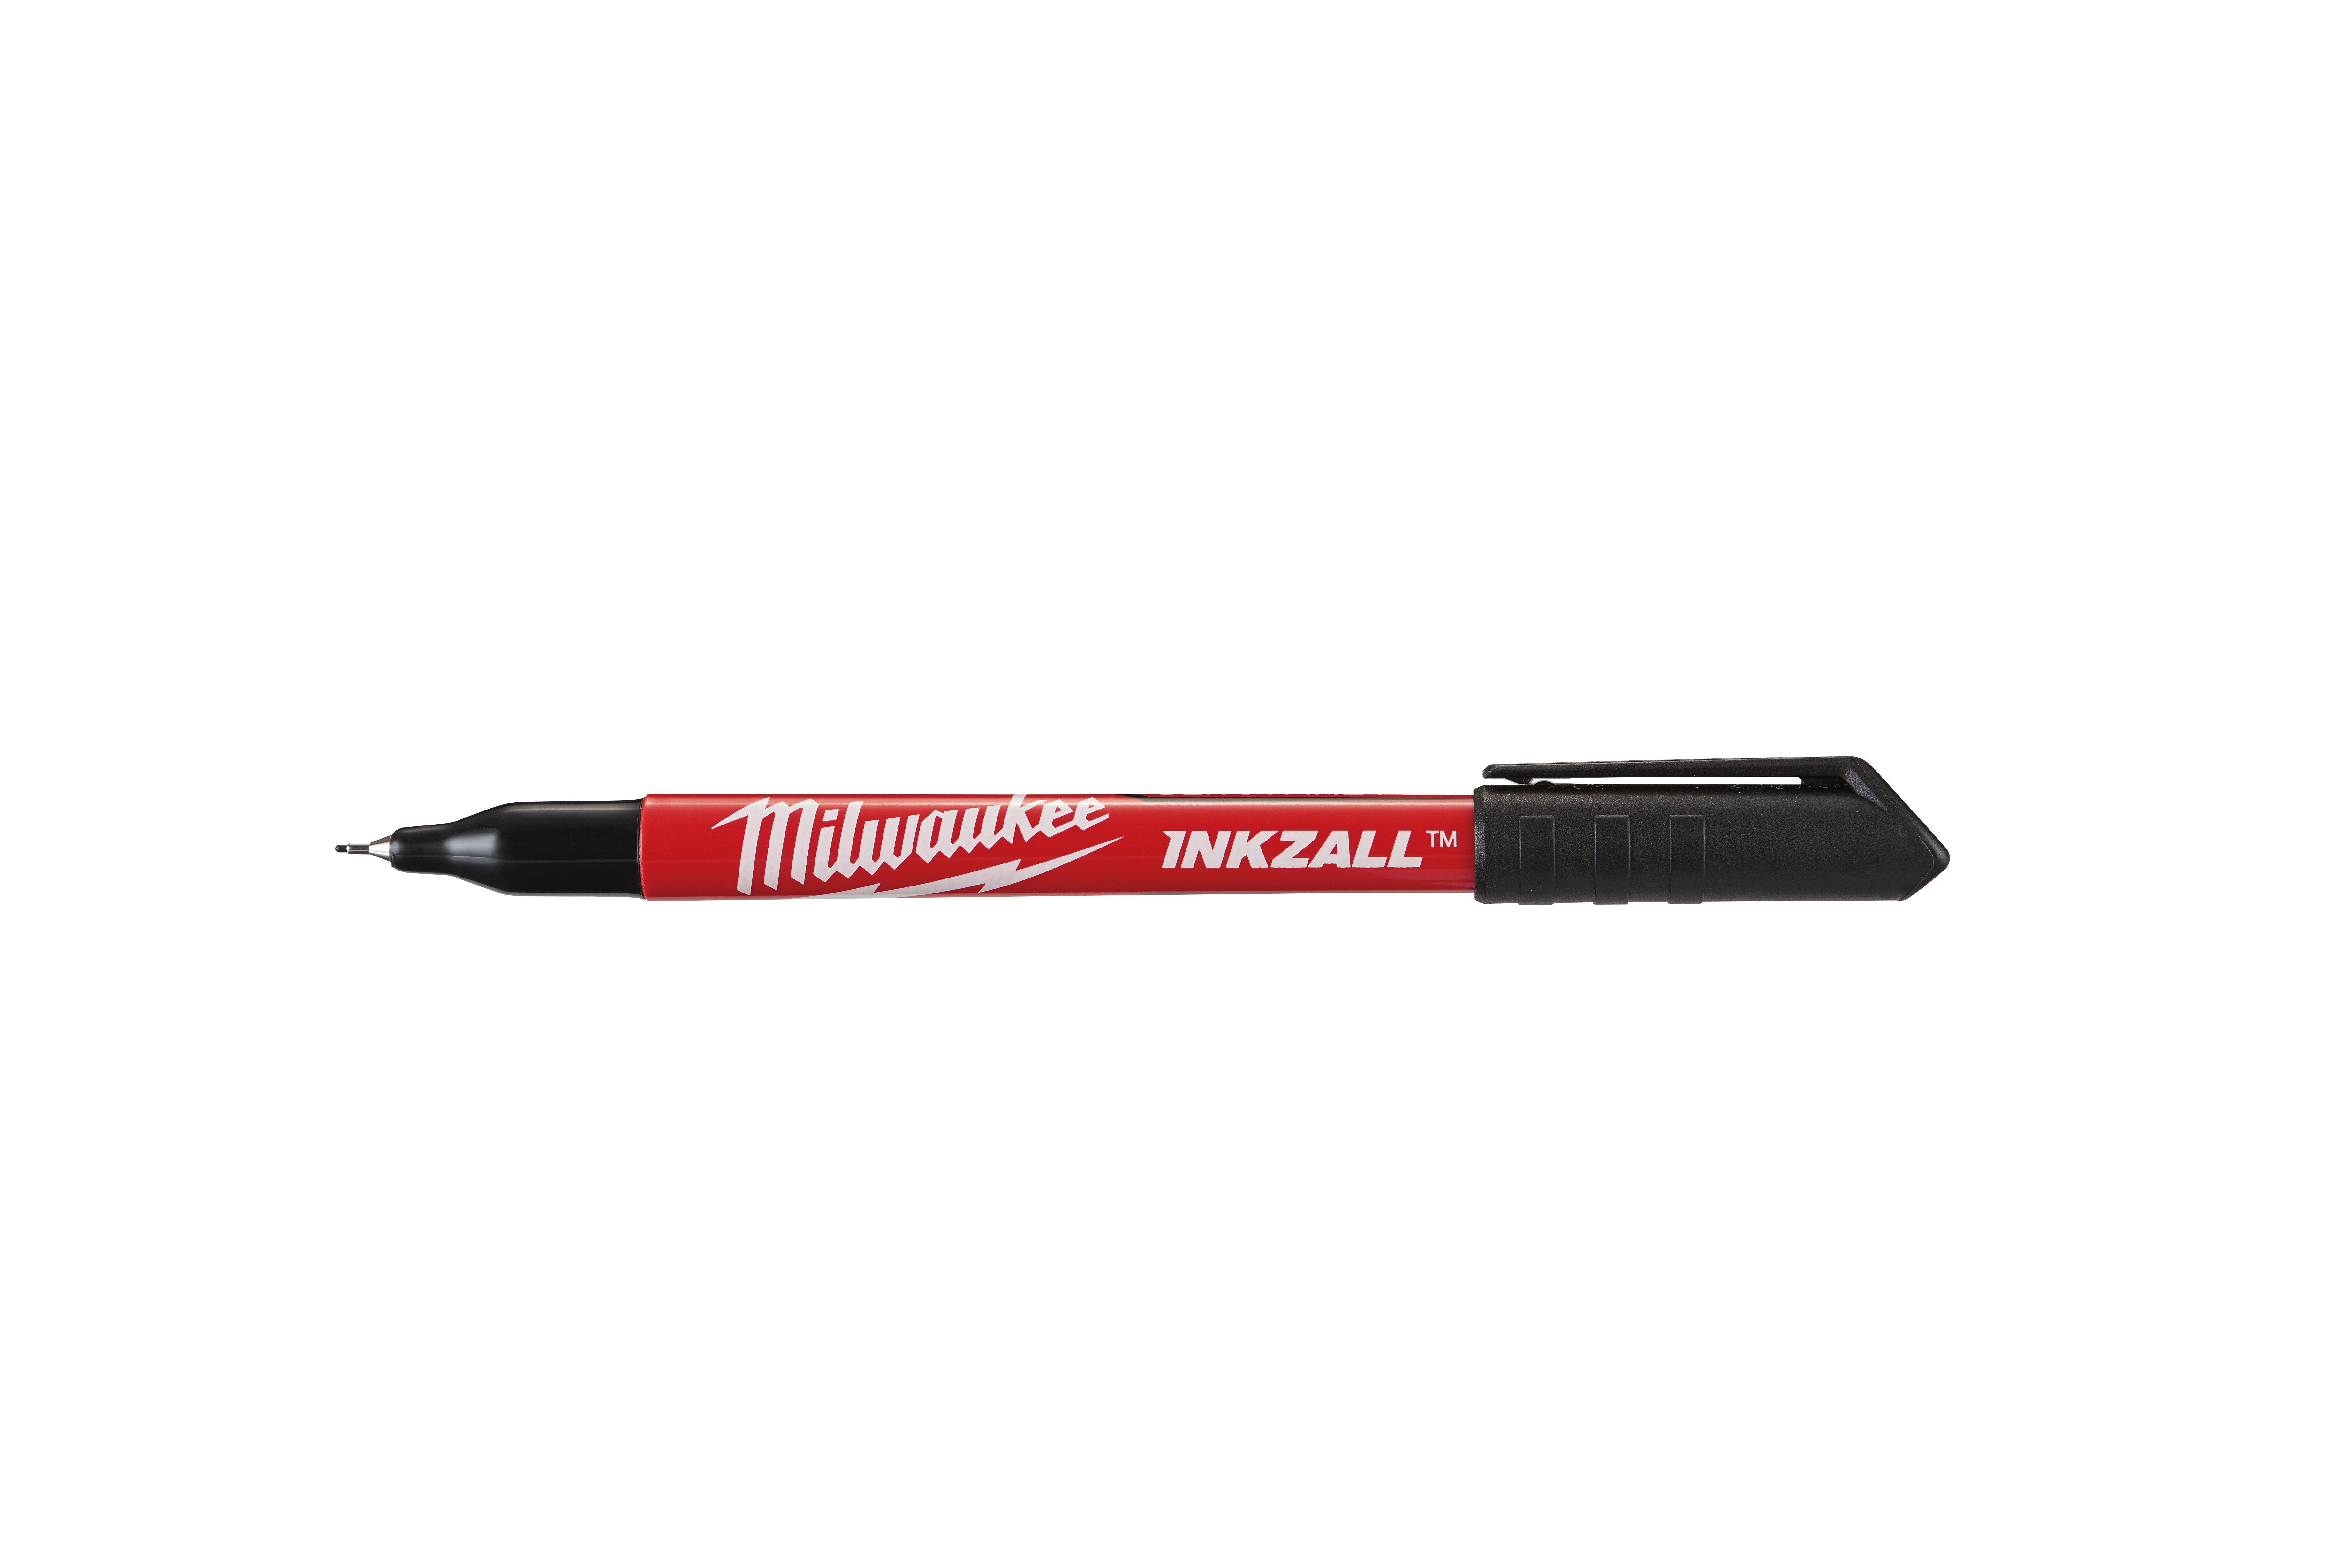 Milwaukee INKZALL™ ultra fine point pens are optimized for jobsite conditions and deliver sharp, precise lines. The durable ultra fine point tip delivers a 0.5 mm line for precise writing and labeling. Bleed resistant ink drys quickly and resists sme...